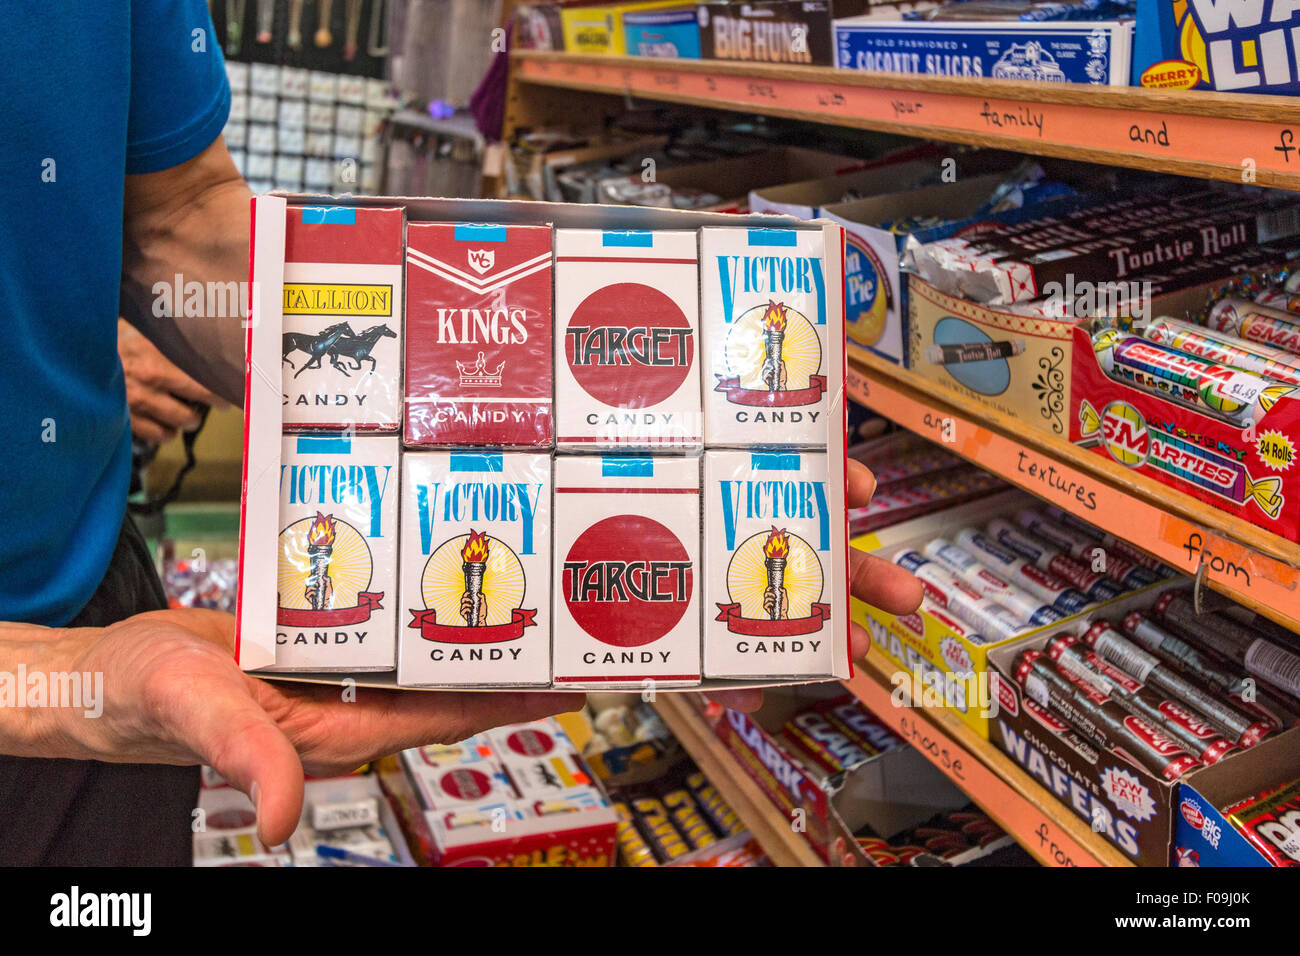 Candy cigarettes, once coveted by children before the 1960s, sold at Dick's 5 & 10, an 'old time' dime store in Branson, MO Stock Photo